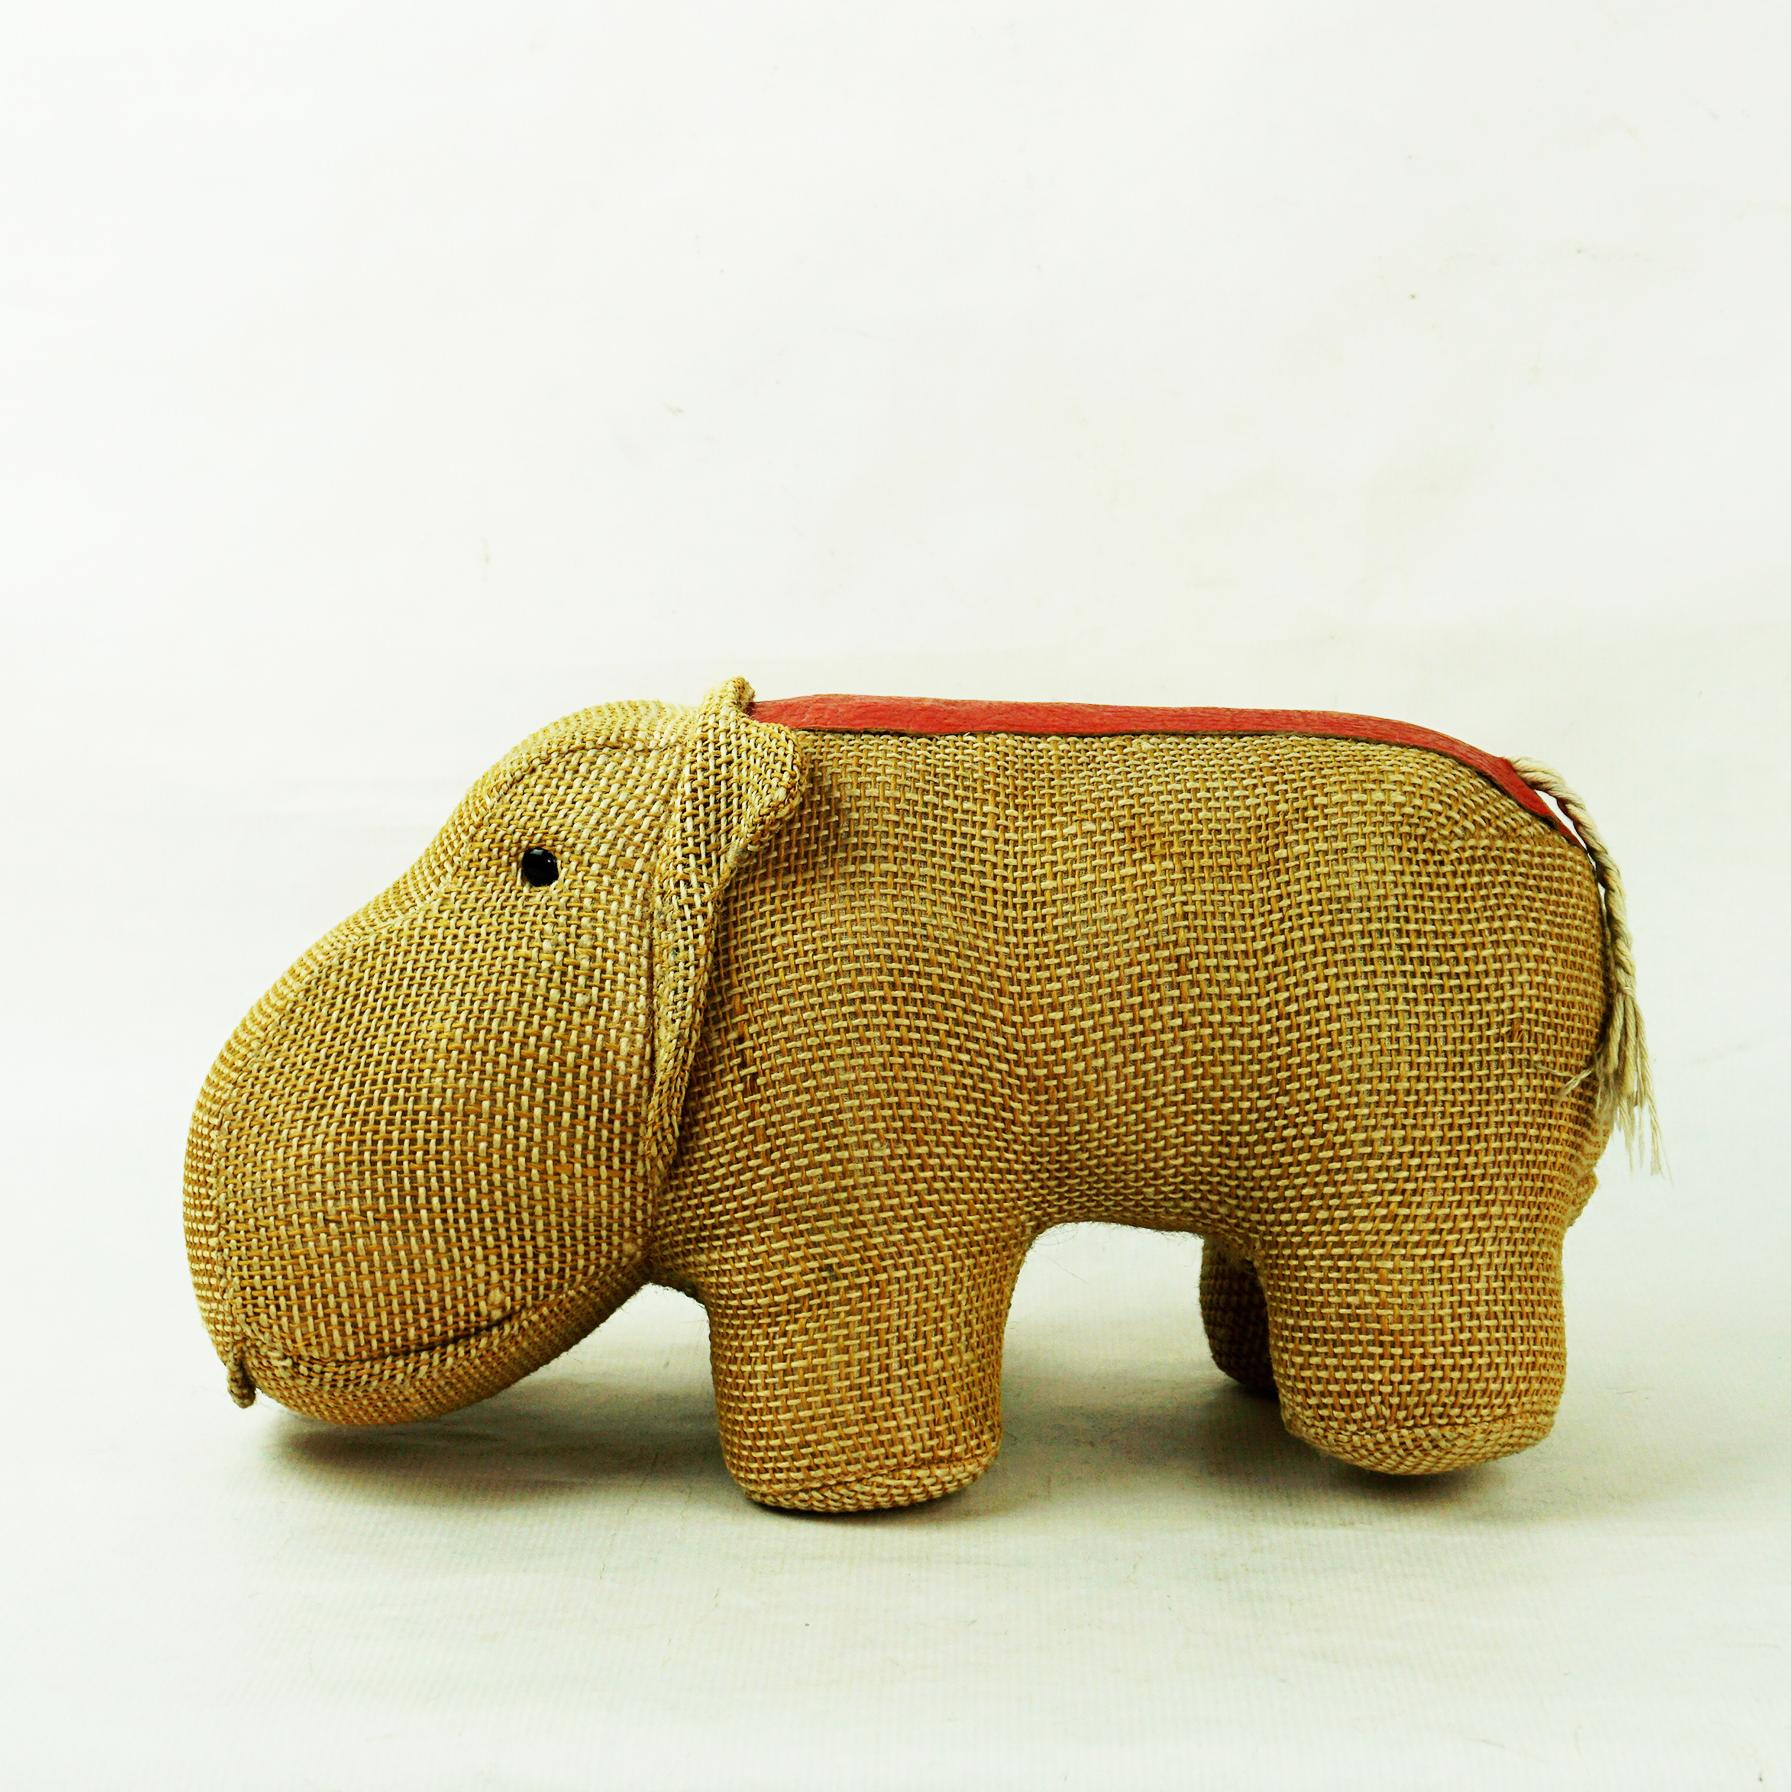 This authentic animal toy from the 1970s was designed by Renate Müller. Unique in shape and workmanship. This example shows hippo made of jute.?The high quality toy is handmade from ecologically acceptable materials. 
Renate Müller developed